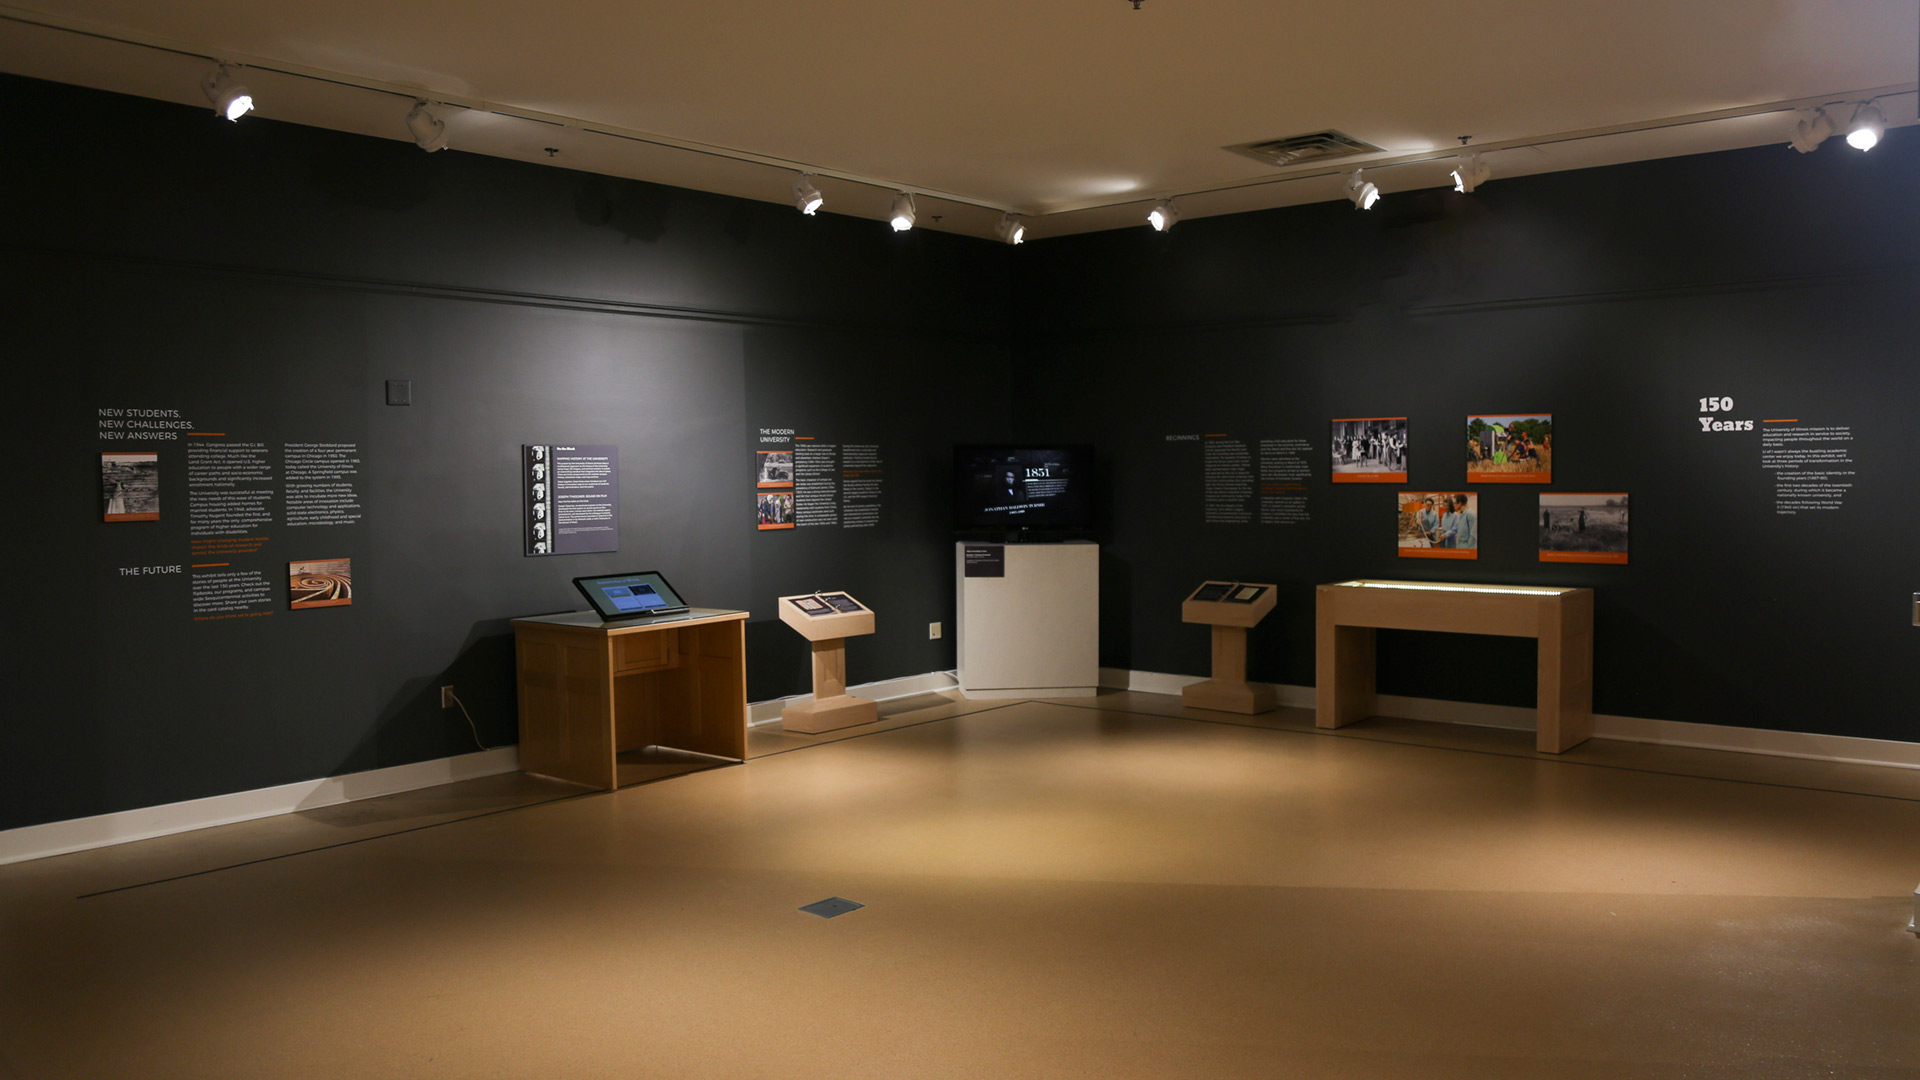 overview shot of another part of the exhibit, with more text, text panels, and pictures on the walls and electronic devices on display to interact with